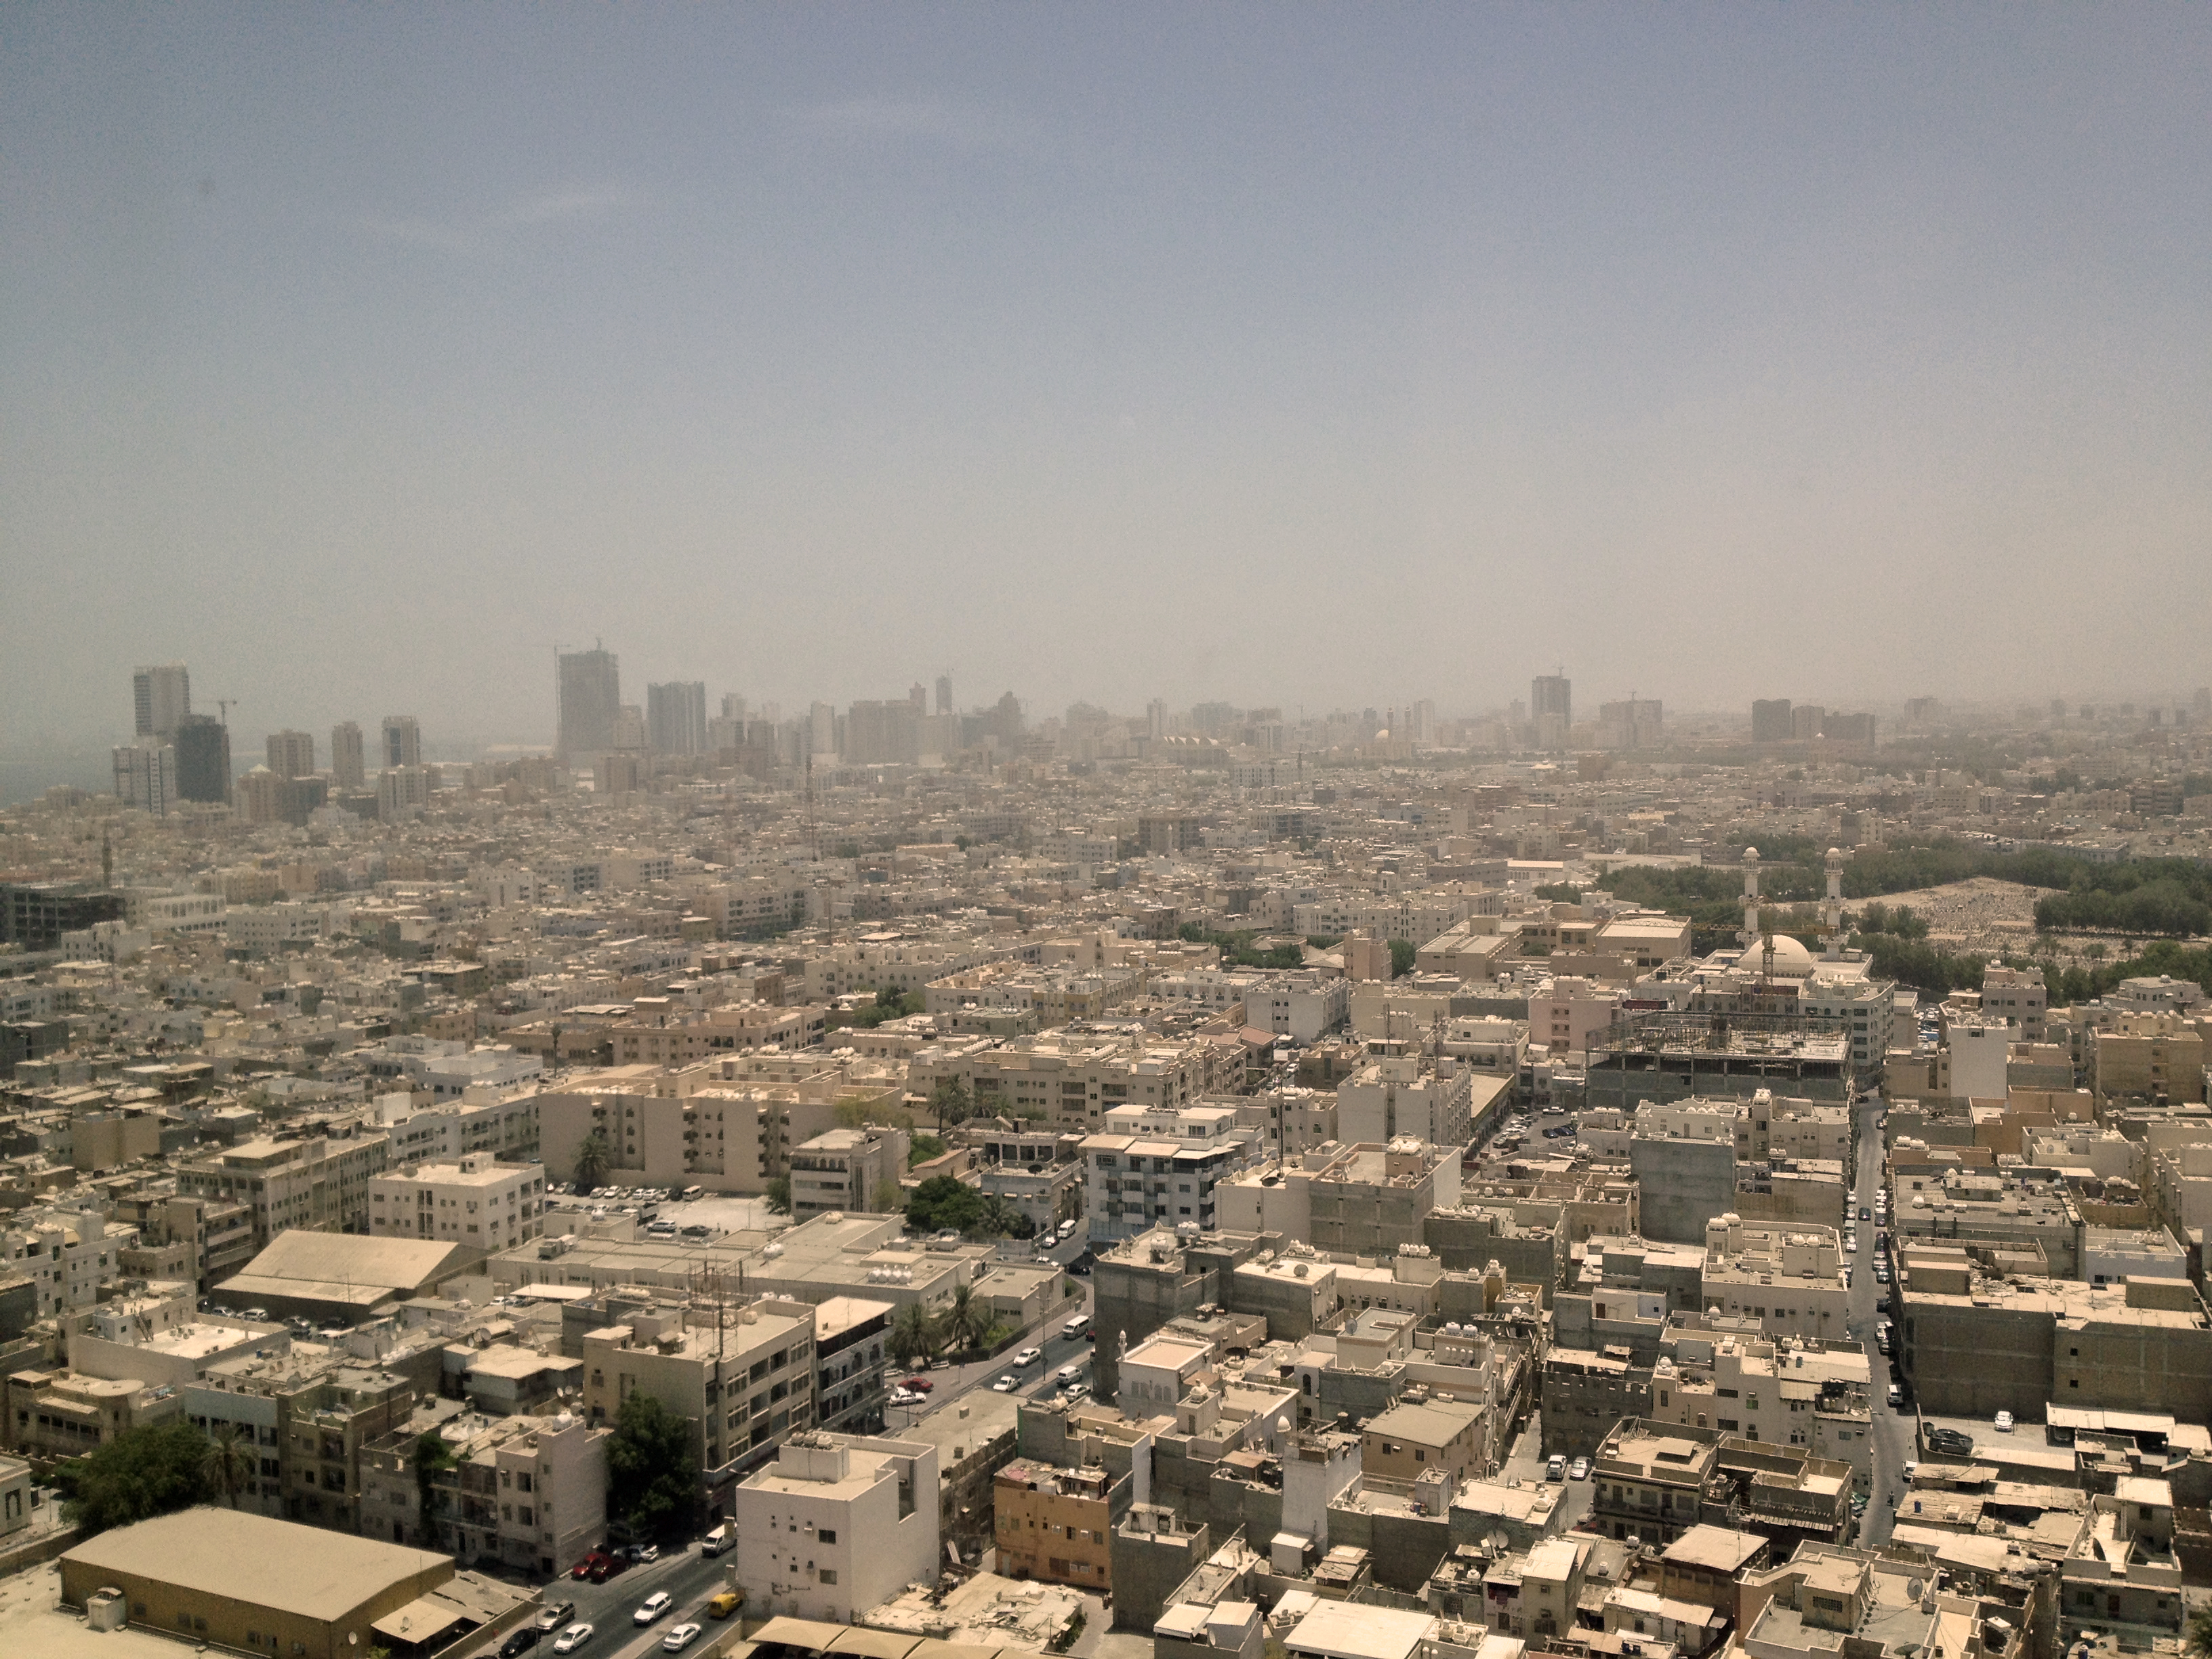  “Old Manama” as seen from atop Al Zamil Tower